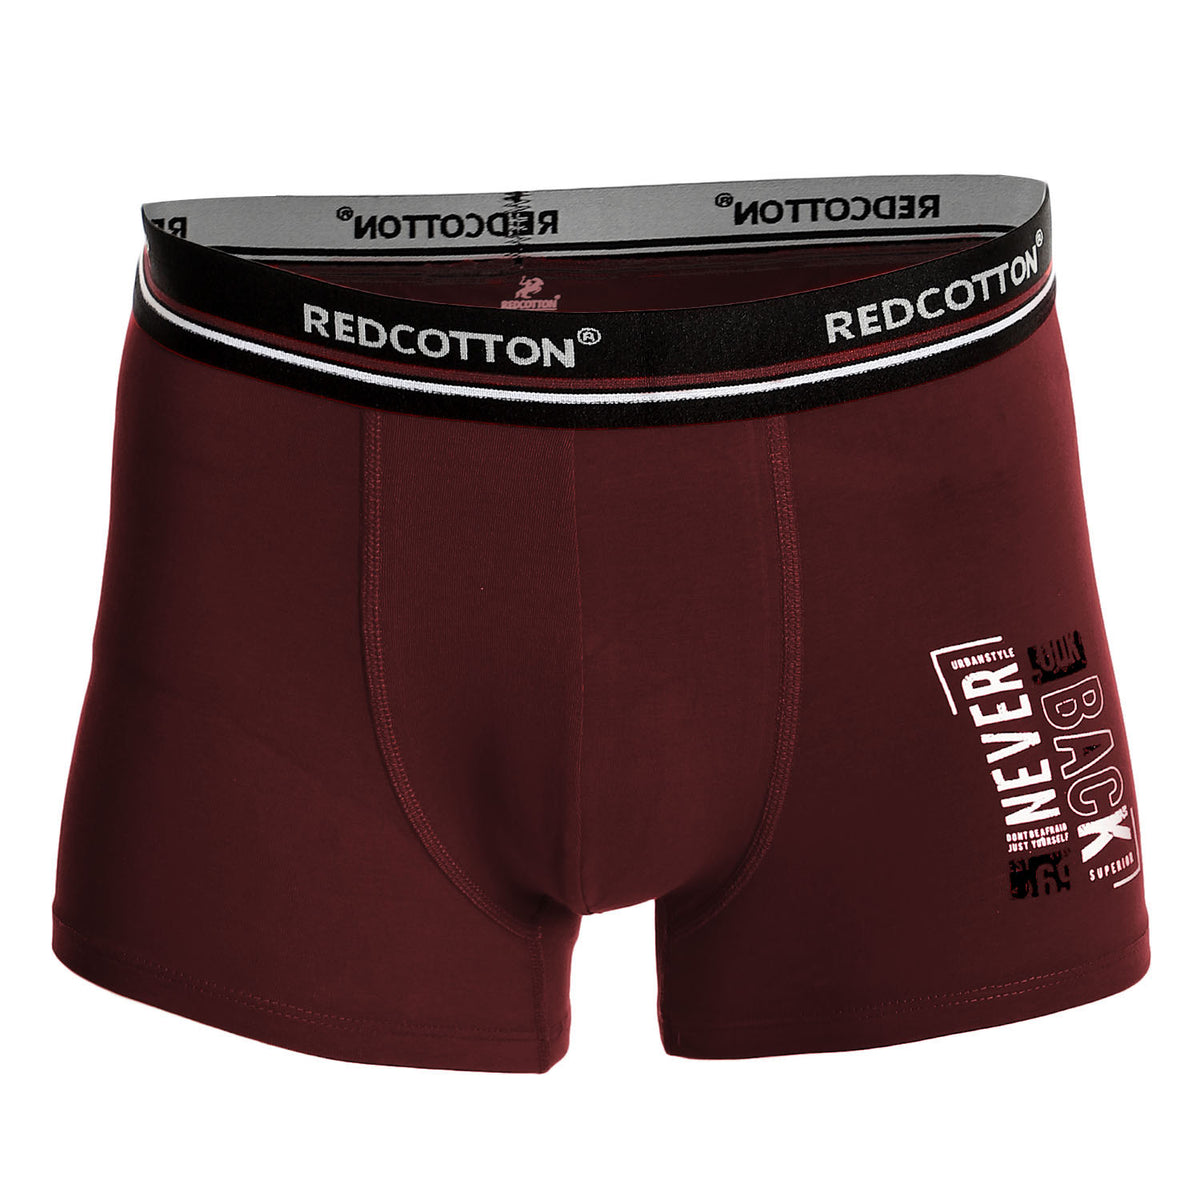 Men Comfort printed boxer from Redcotton